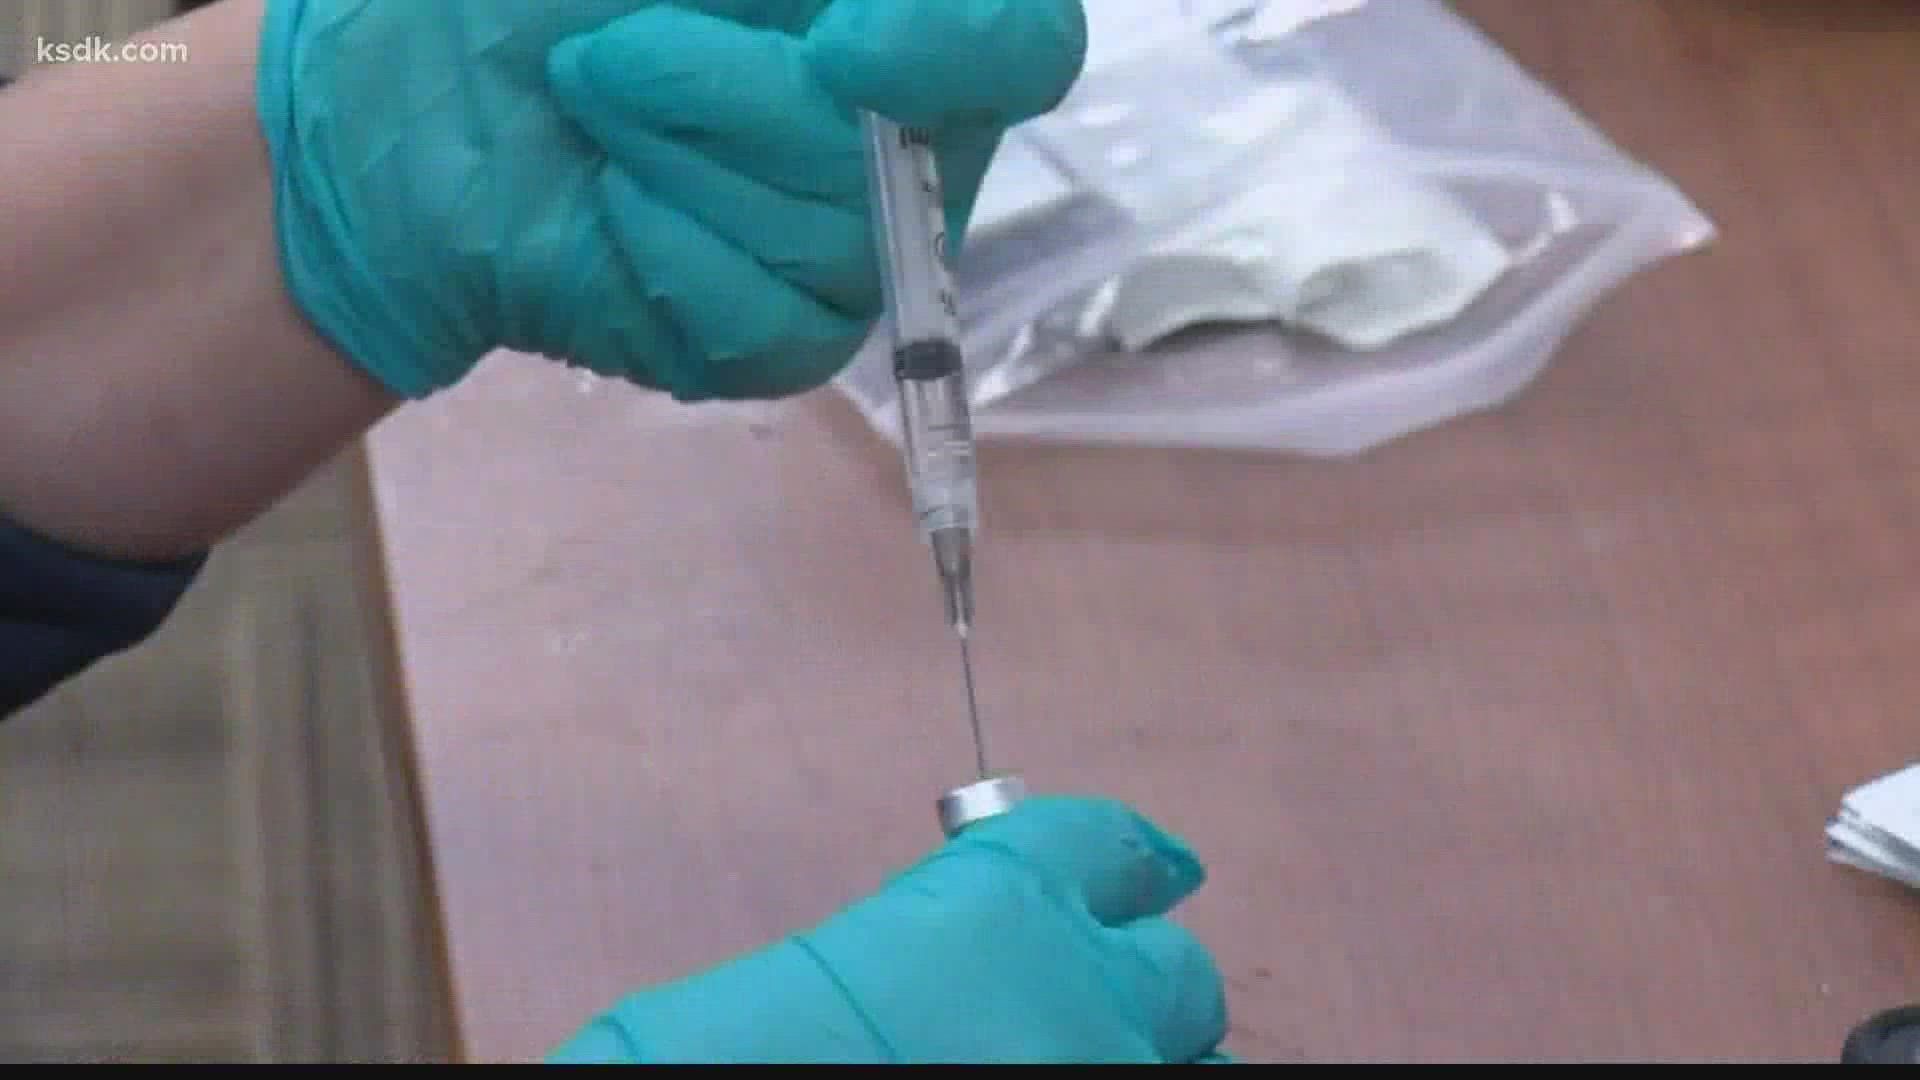 Time is up for state workers in Illinois to get the COVID-19 vaccine.